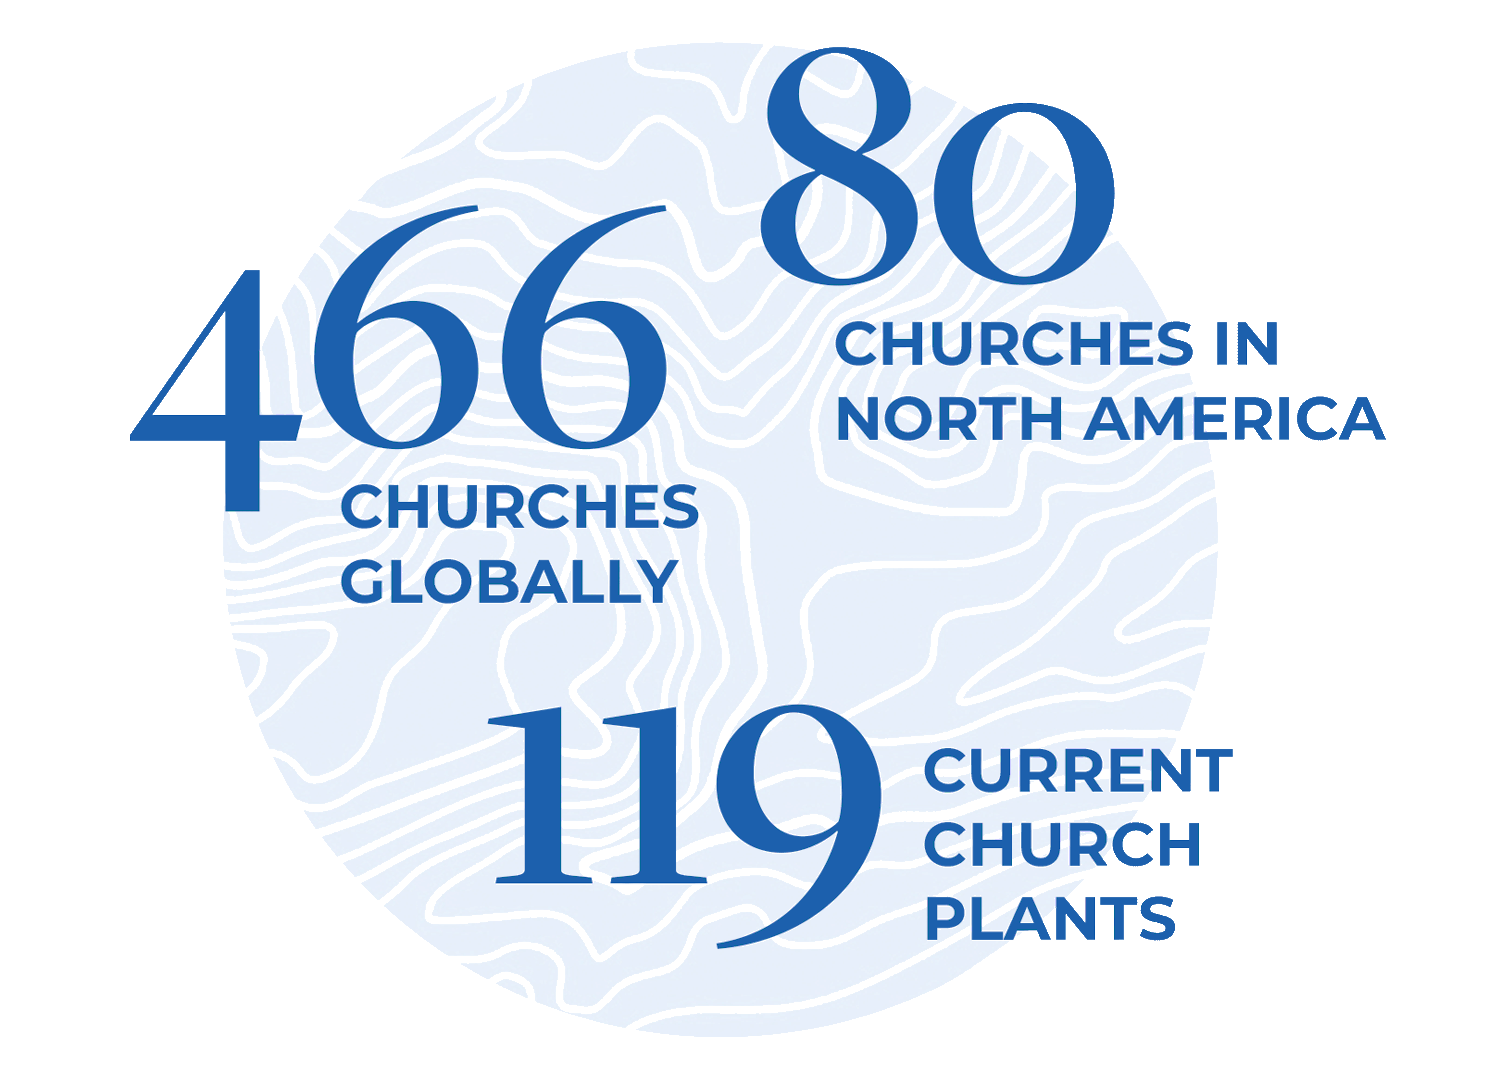 466 churches globally, 80 churches in North America, and 119 current church plants